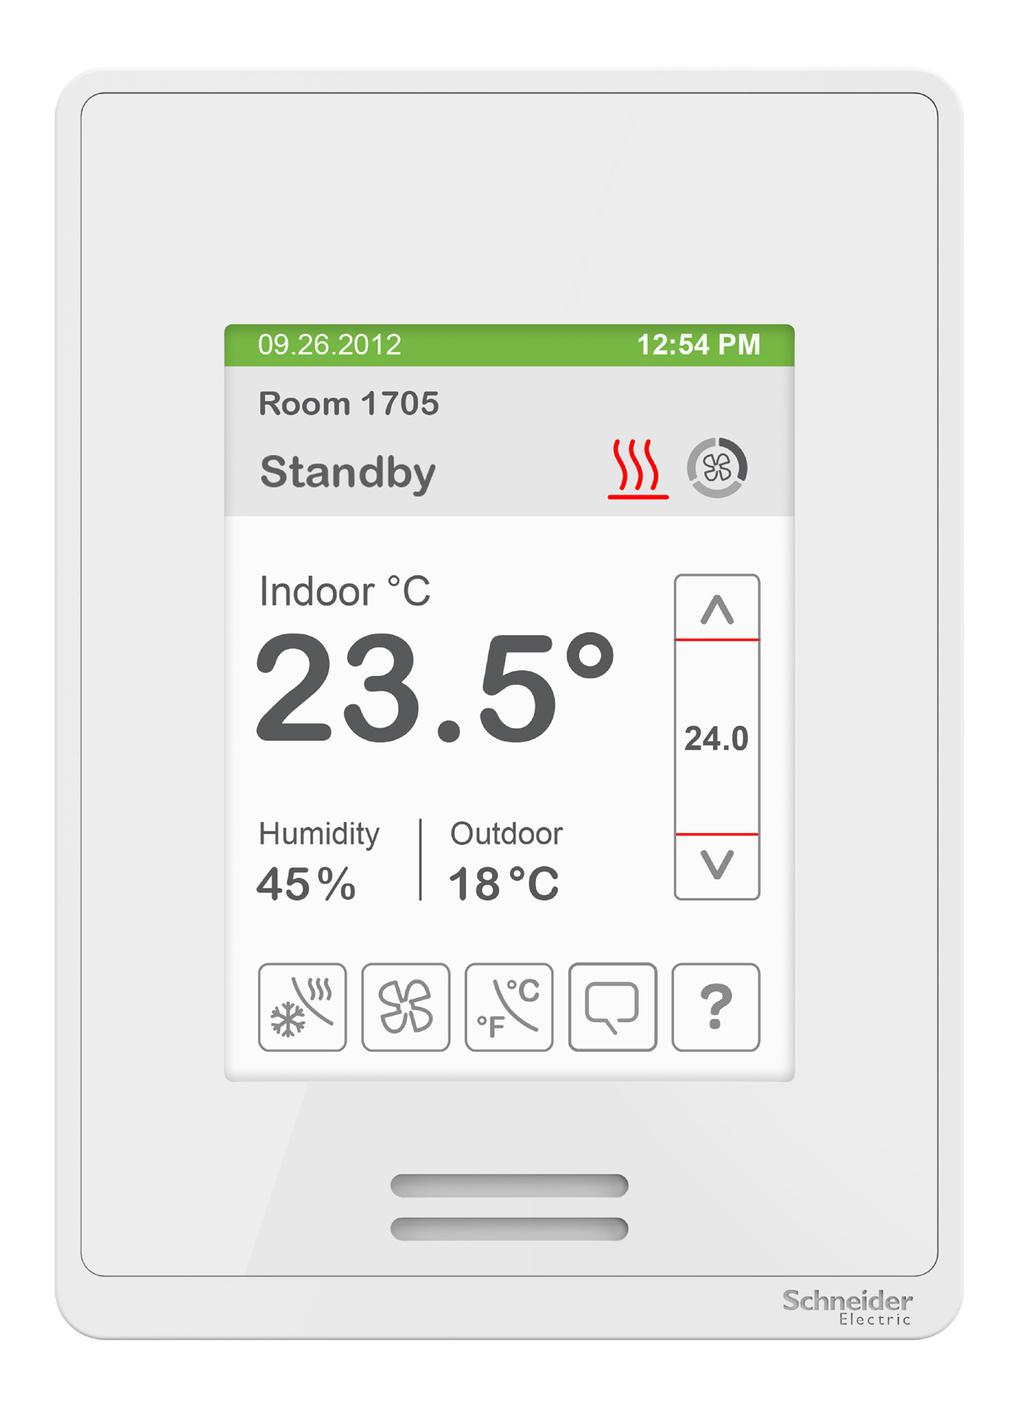 2 HMI Display The User HMI is configurable and allows display functions such as Date, Time, Outdoor Temperature, and Setpoint to be enabled or disabled by setting various parameters.